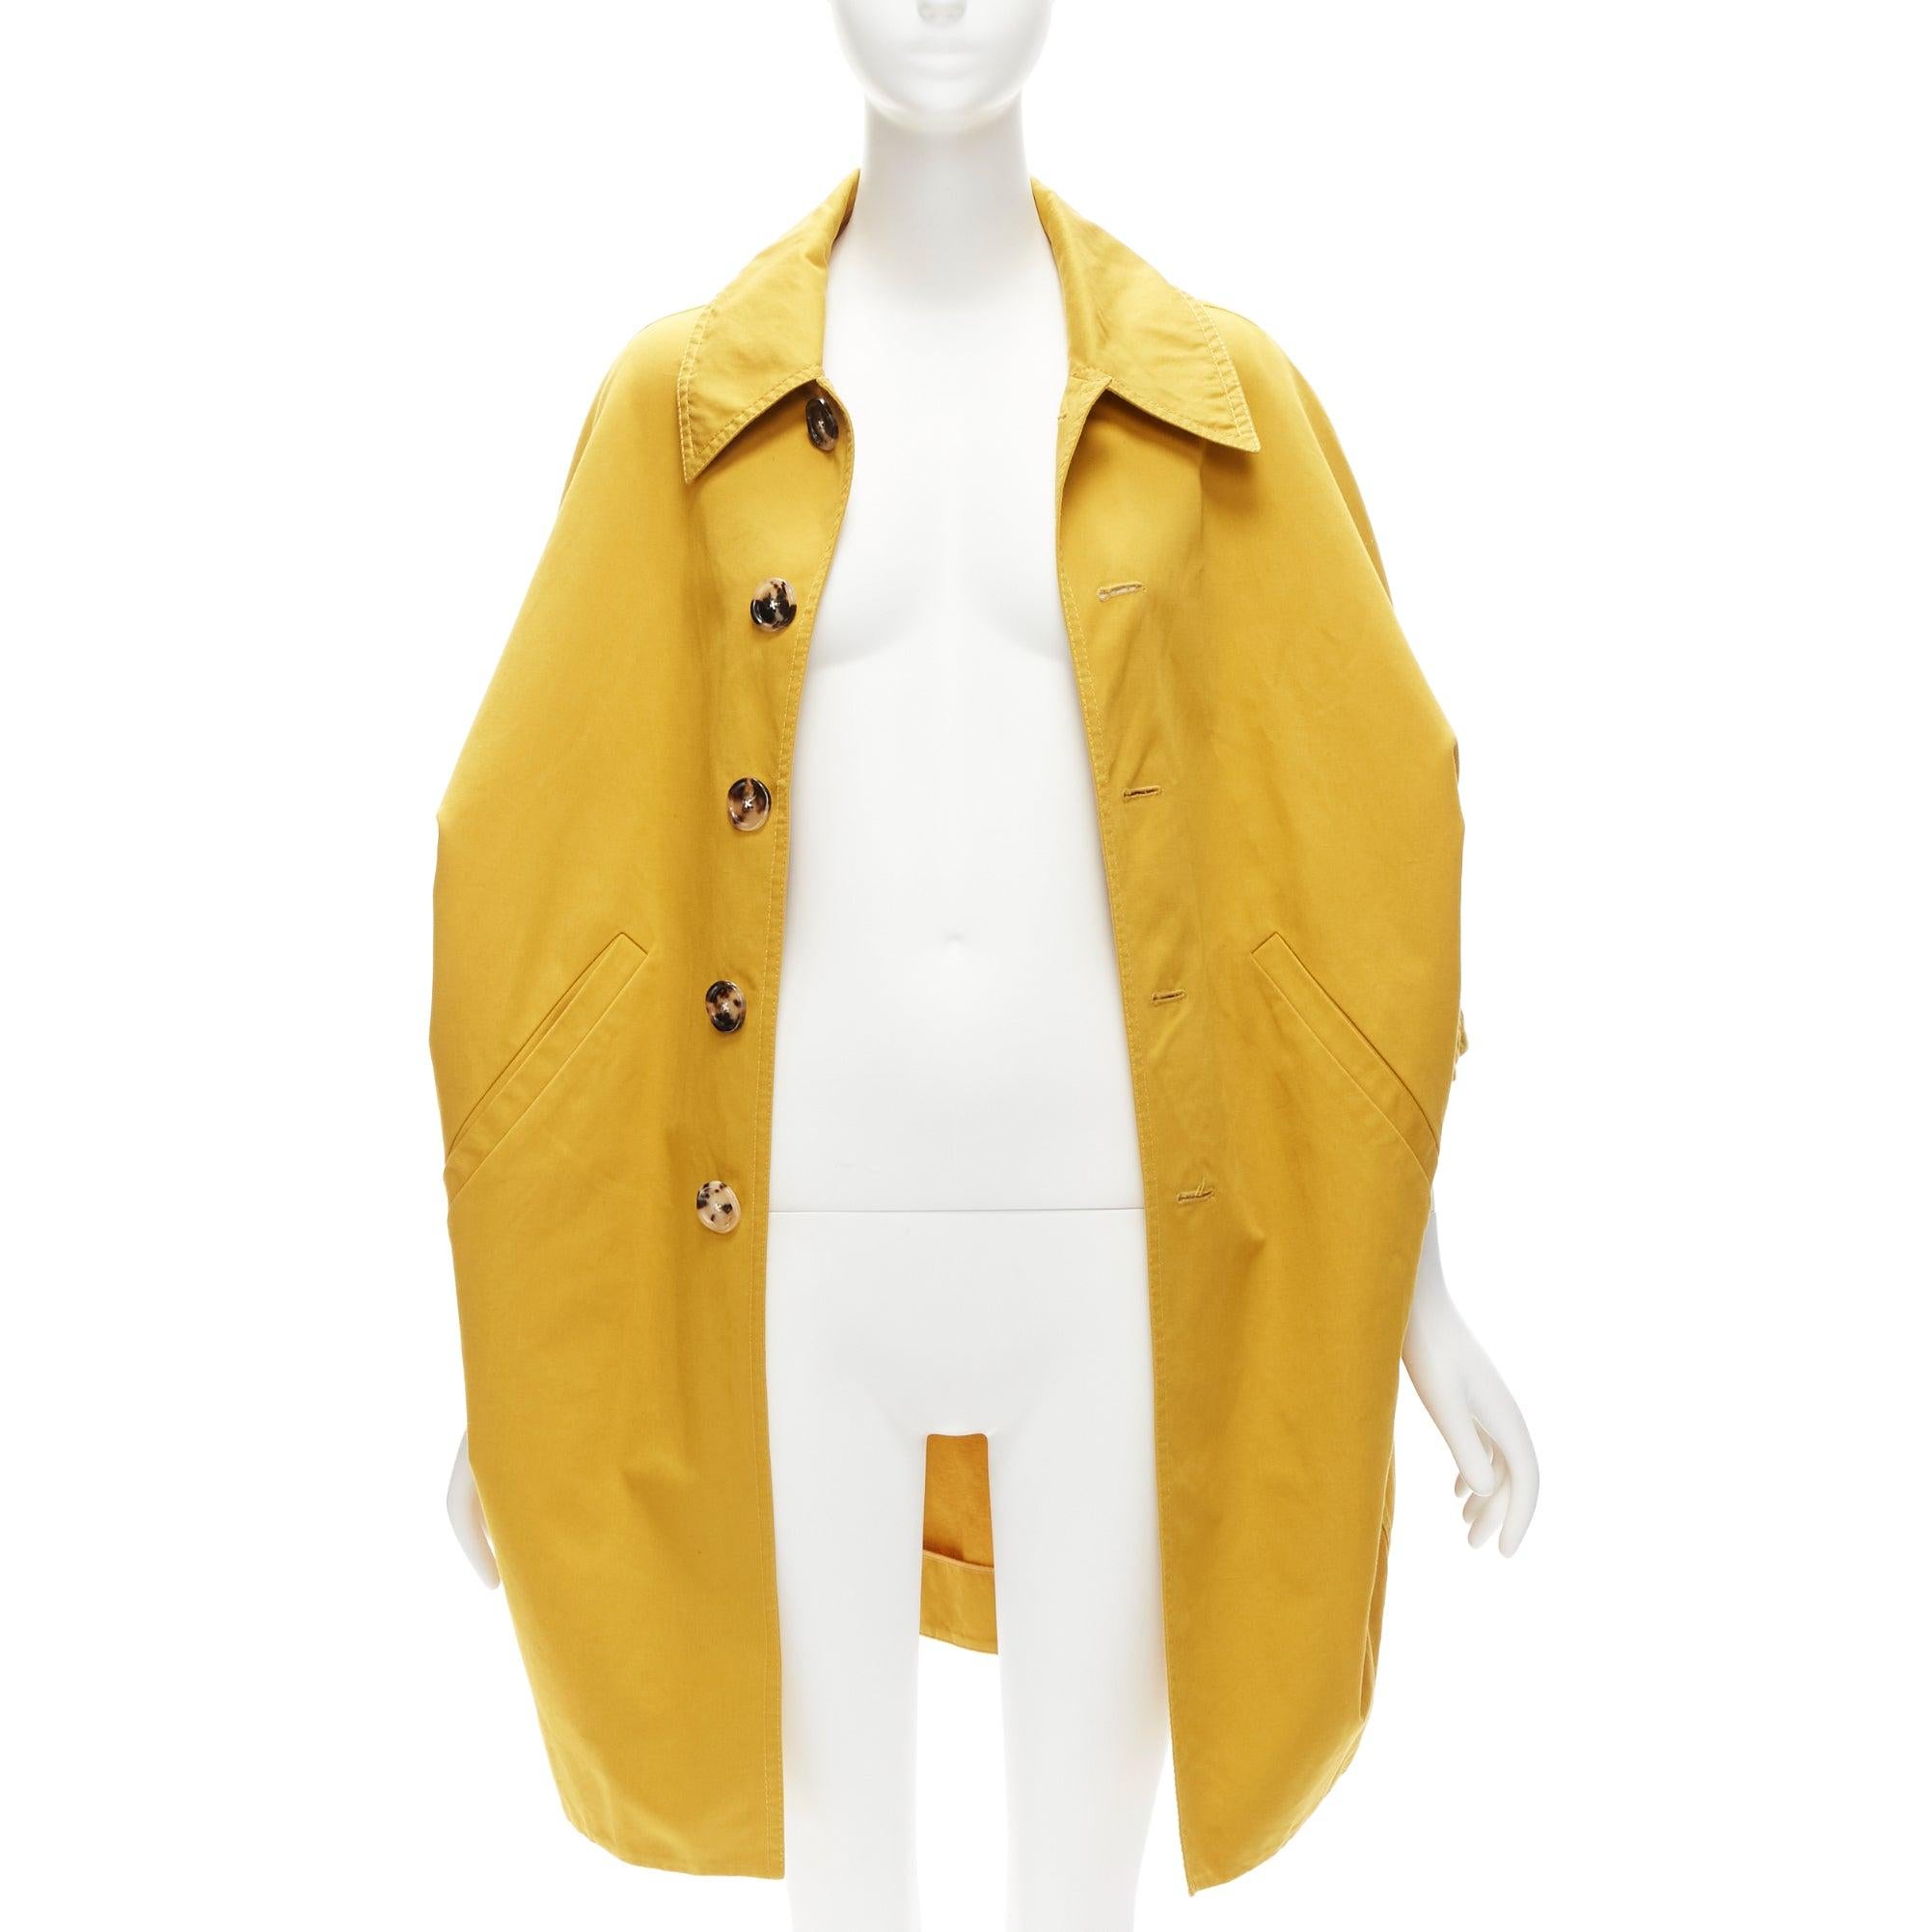 MARNI mustard yellow cotton linen cocoon cropped sleeves coat IT36 XS
Reference: CELG/A00234
Brand: Marni
Material: Cotton, Linen
Color: Yellow, Brown
Pattern: Solid
Closure: Button
Lining: Yellow Fabric
Extra Details: Beautiful cocoon shape.
Made